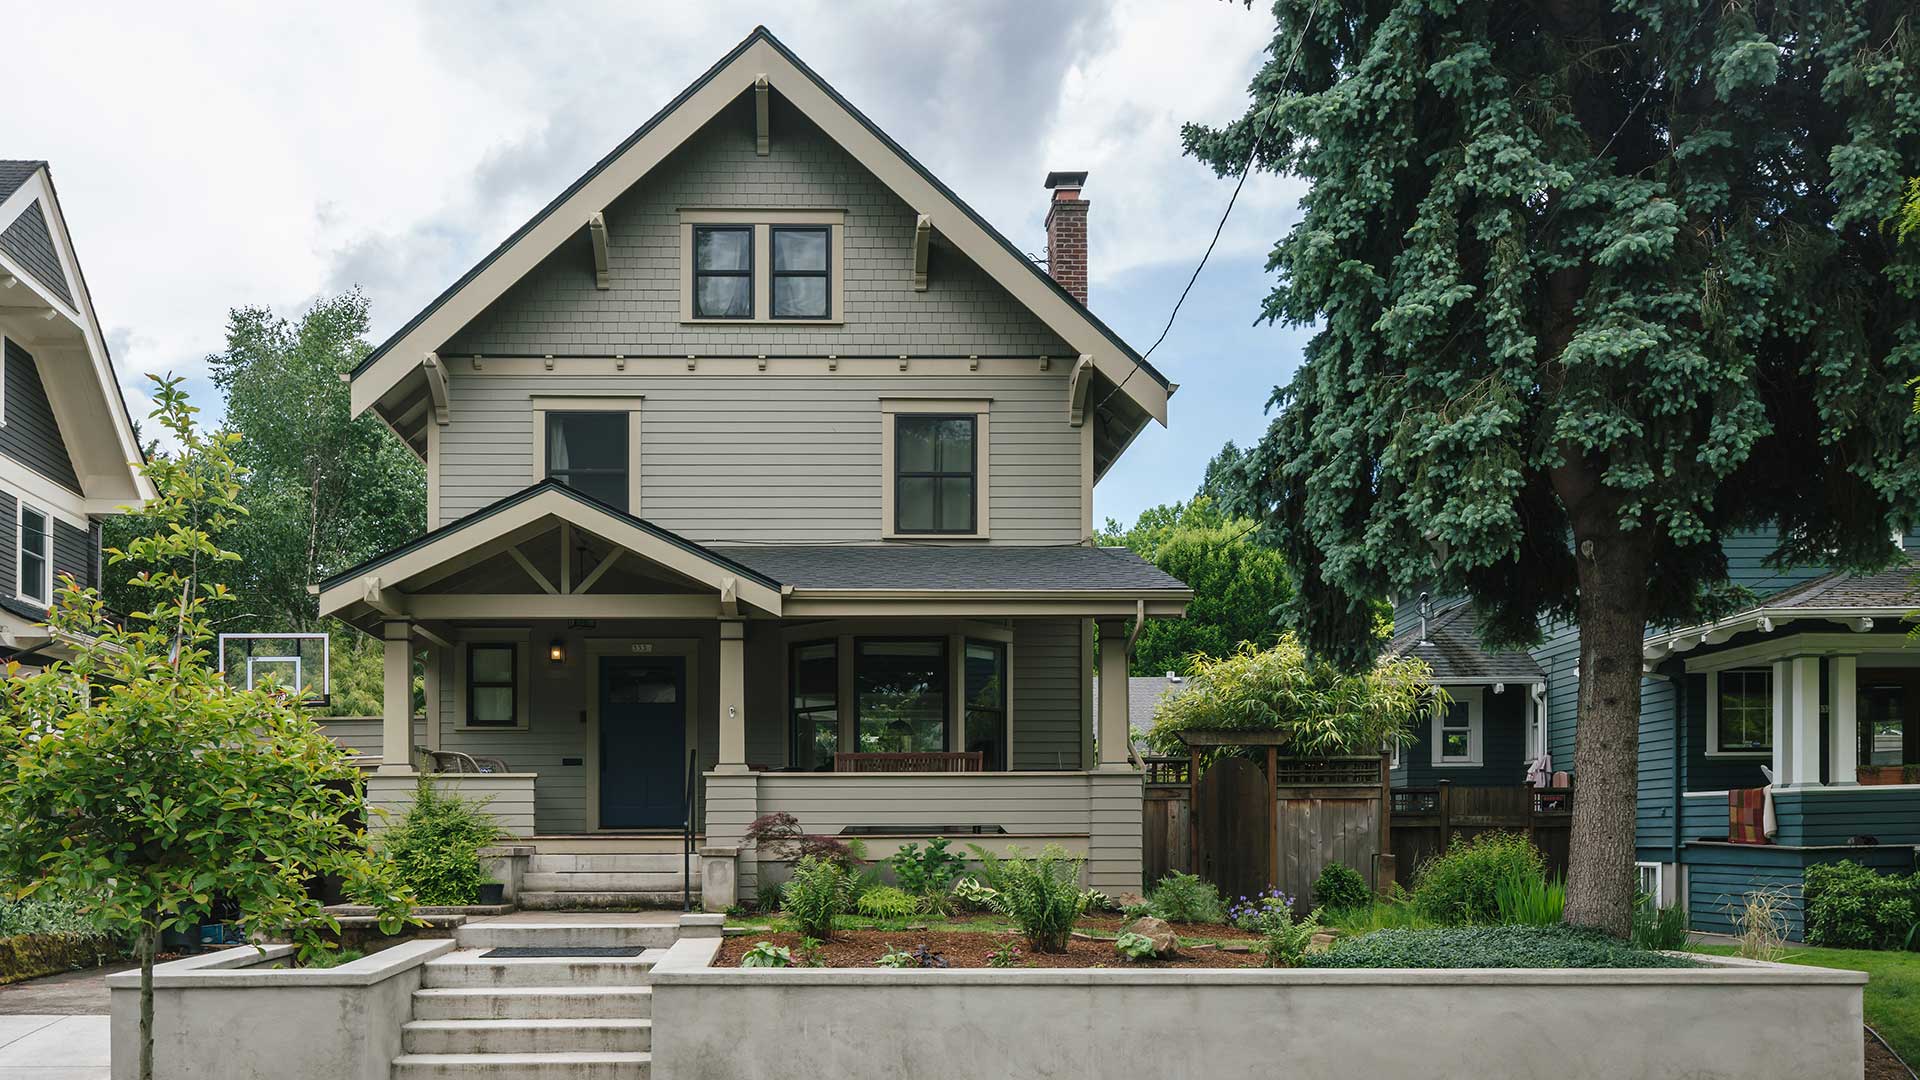 The Laurelhurst Craftsman blends in with the other old traditional homes in the neighborhood.